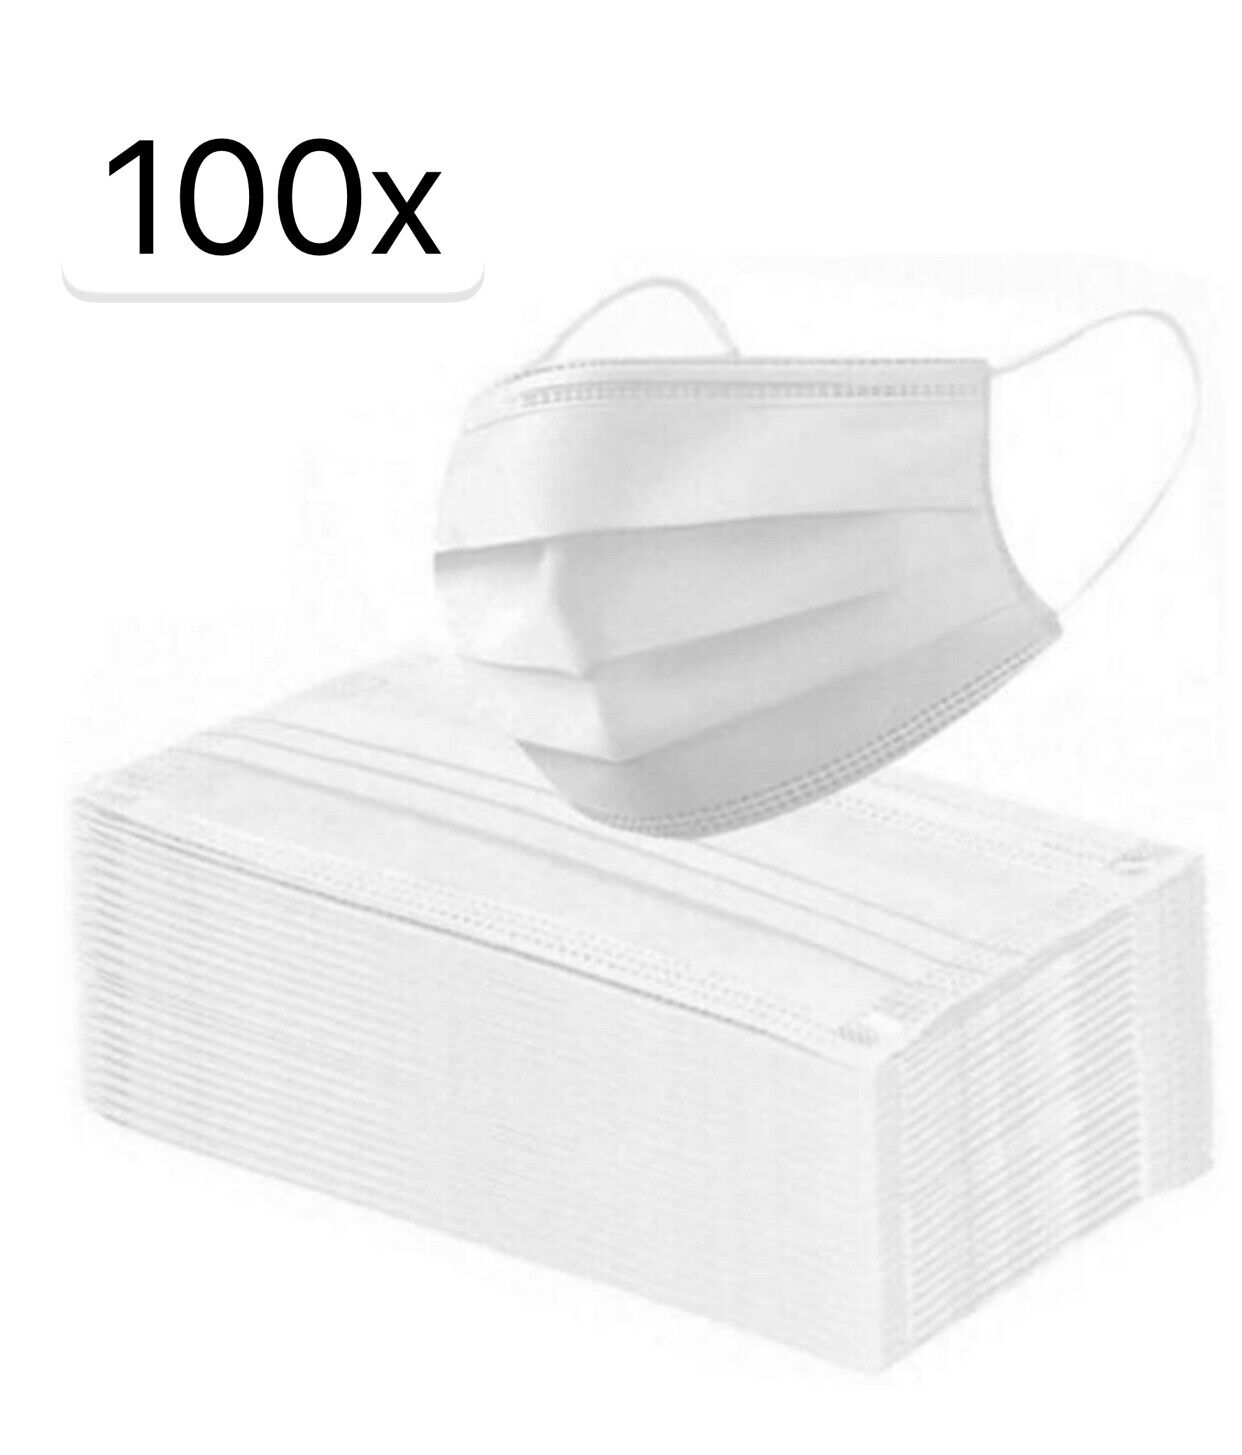 100 Pcs White Face Mask with Filter Mouth & Nose Protector Respirator Masks USA Unbranded Does Not Apply